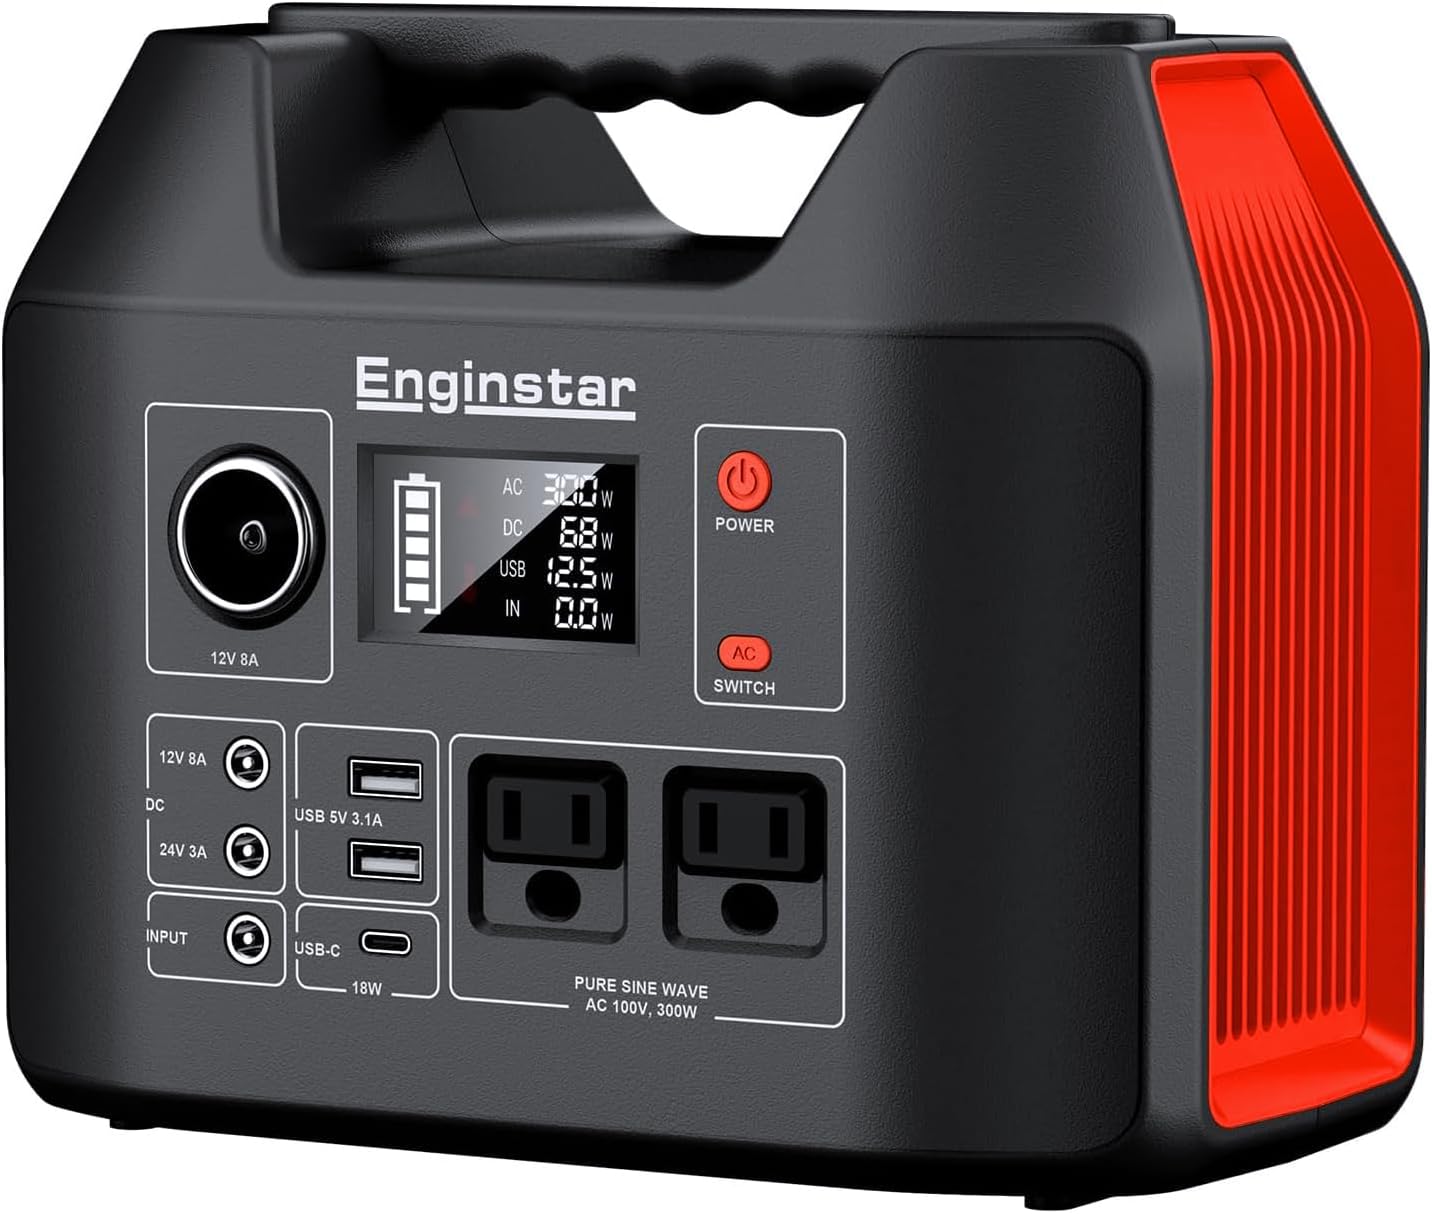 EnginStar Solar Generator, 300W Portable Power Station, 296Wh Lithium Battery Backup w/Two 110V Pure Sine Wave AC Outlet for Camping Road Trip RV, 80000mAh Sufficient Power Supply - EnginStar Solar Generator Review